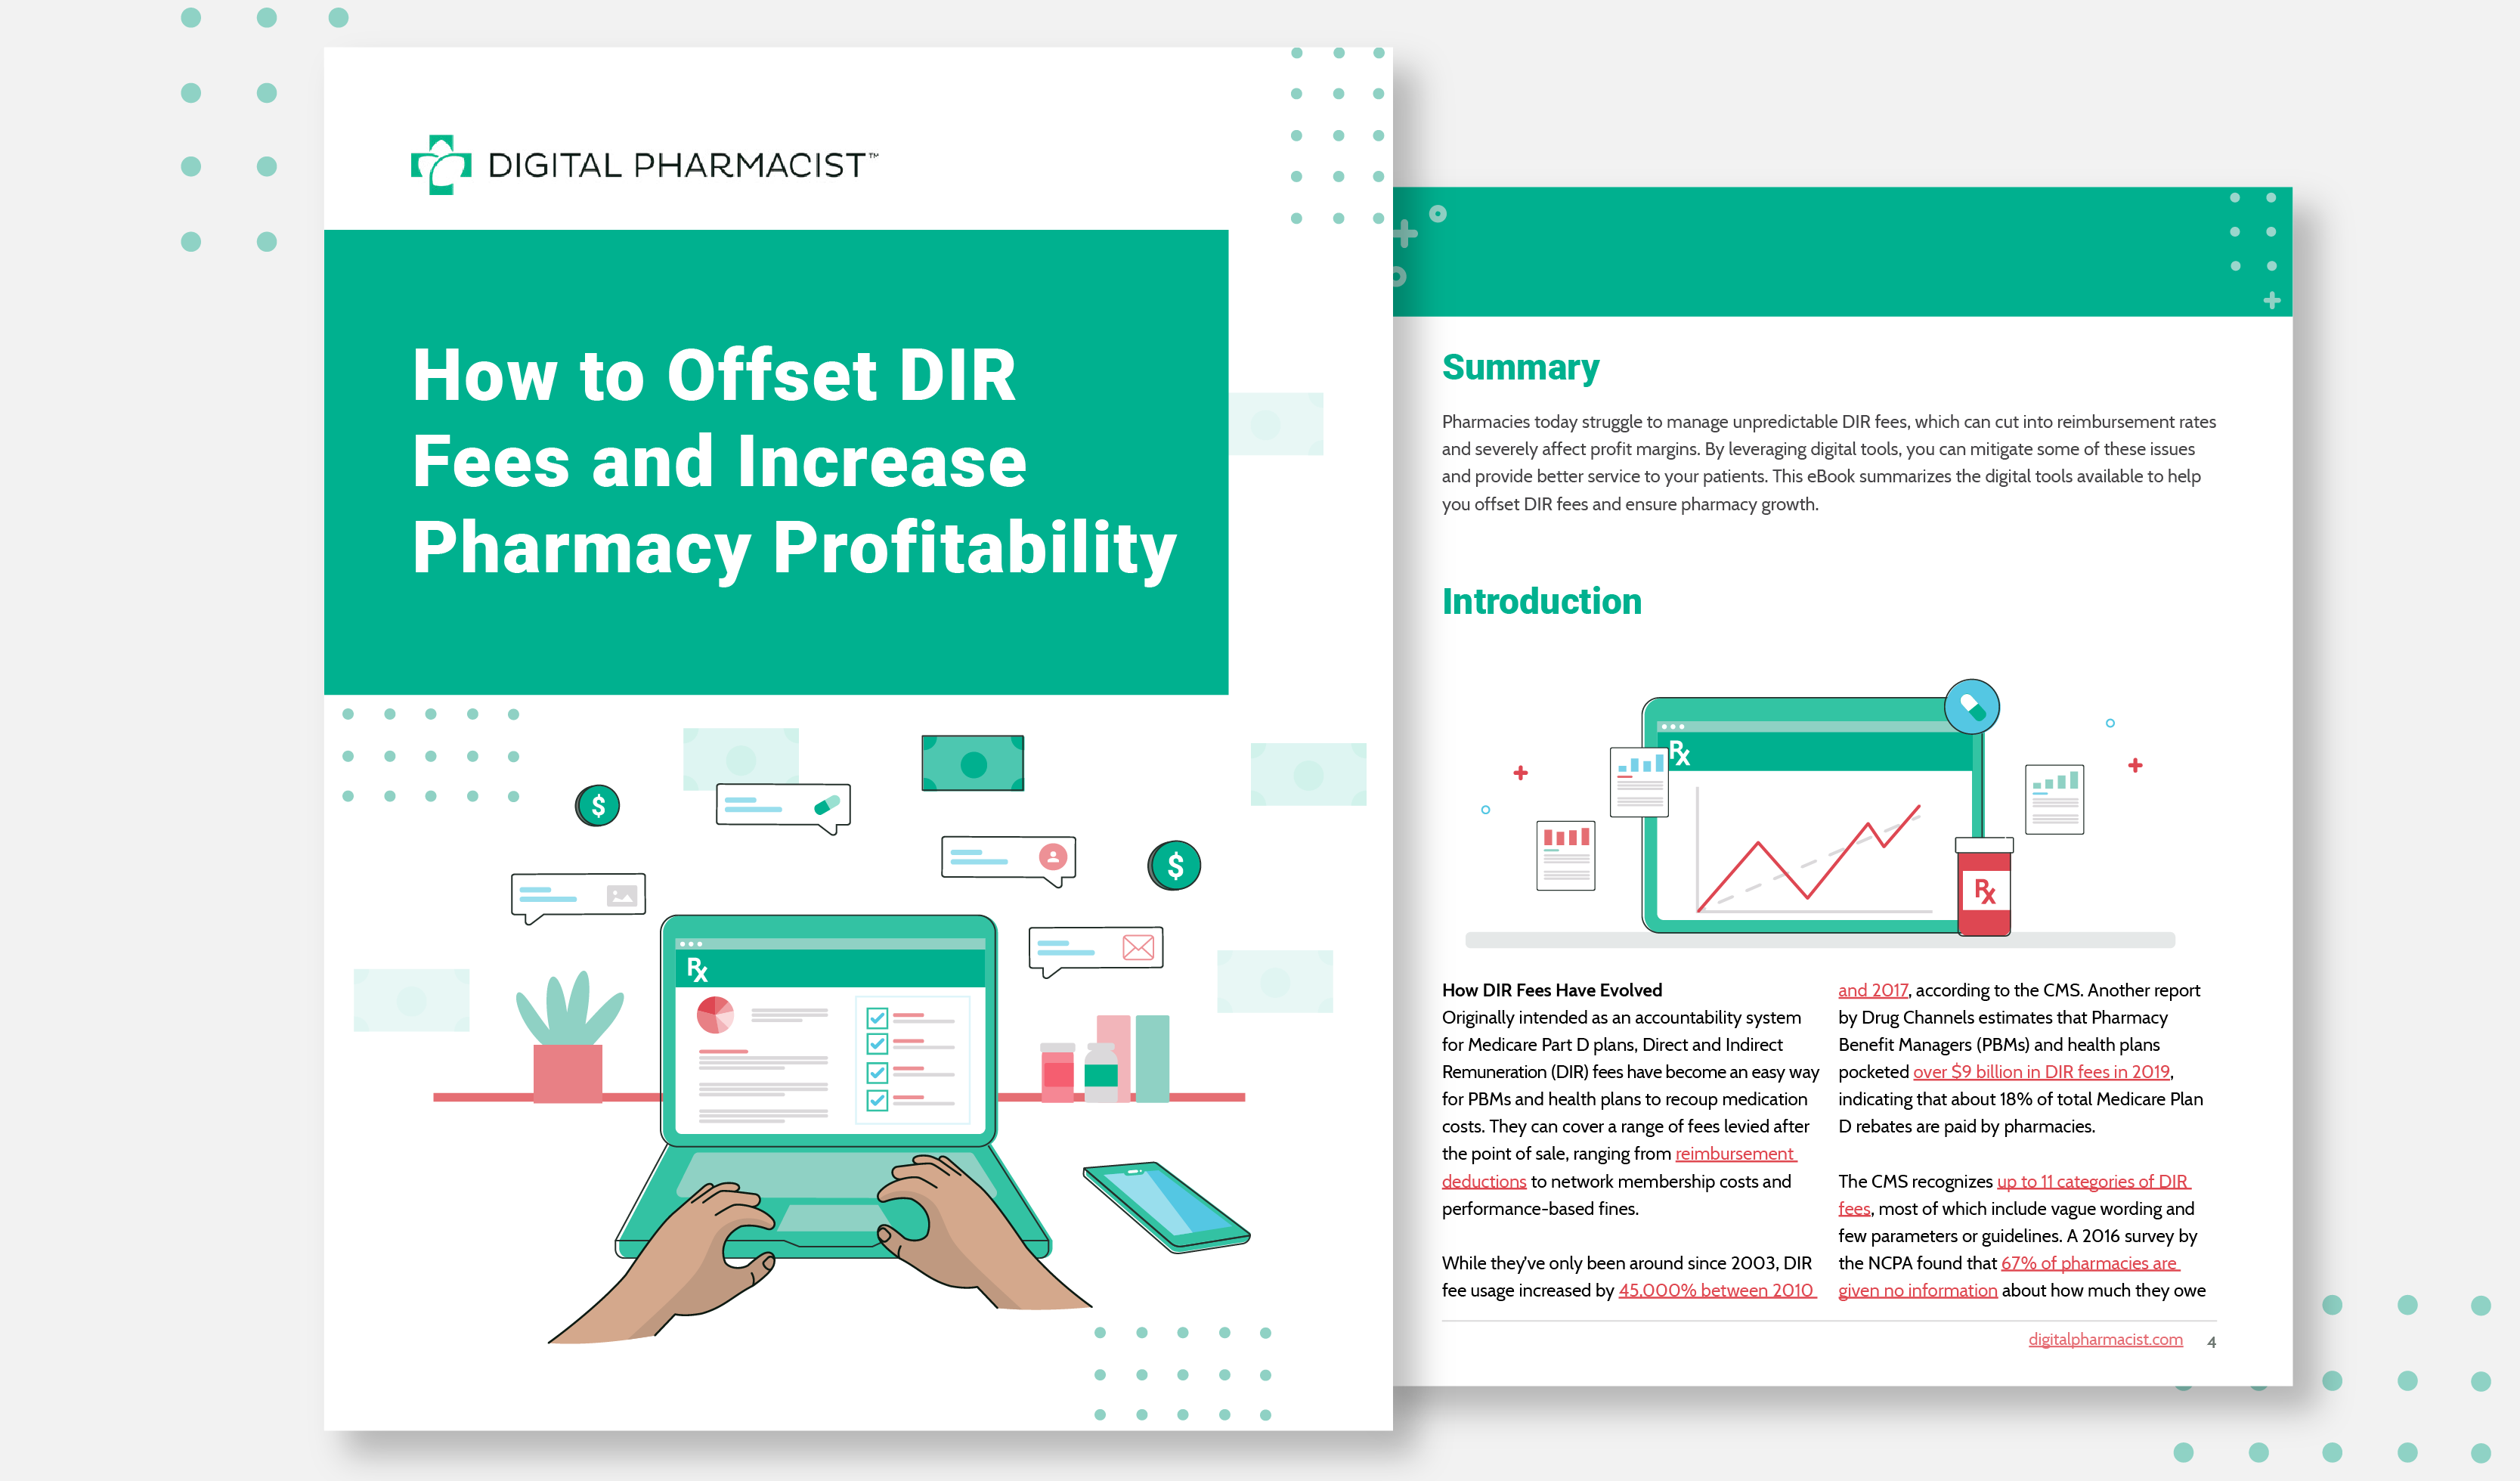 How to Offset DIR Fees and Increase Pharmacy Profitability_1 (1)